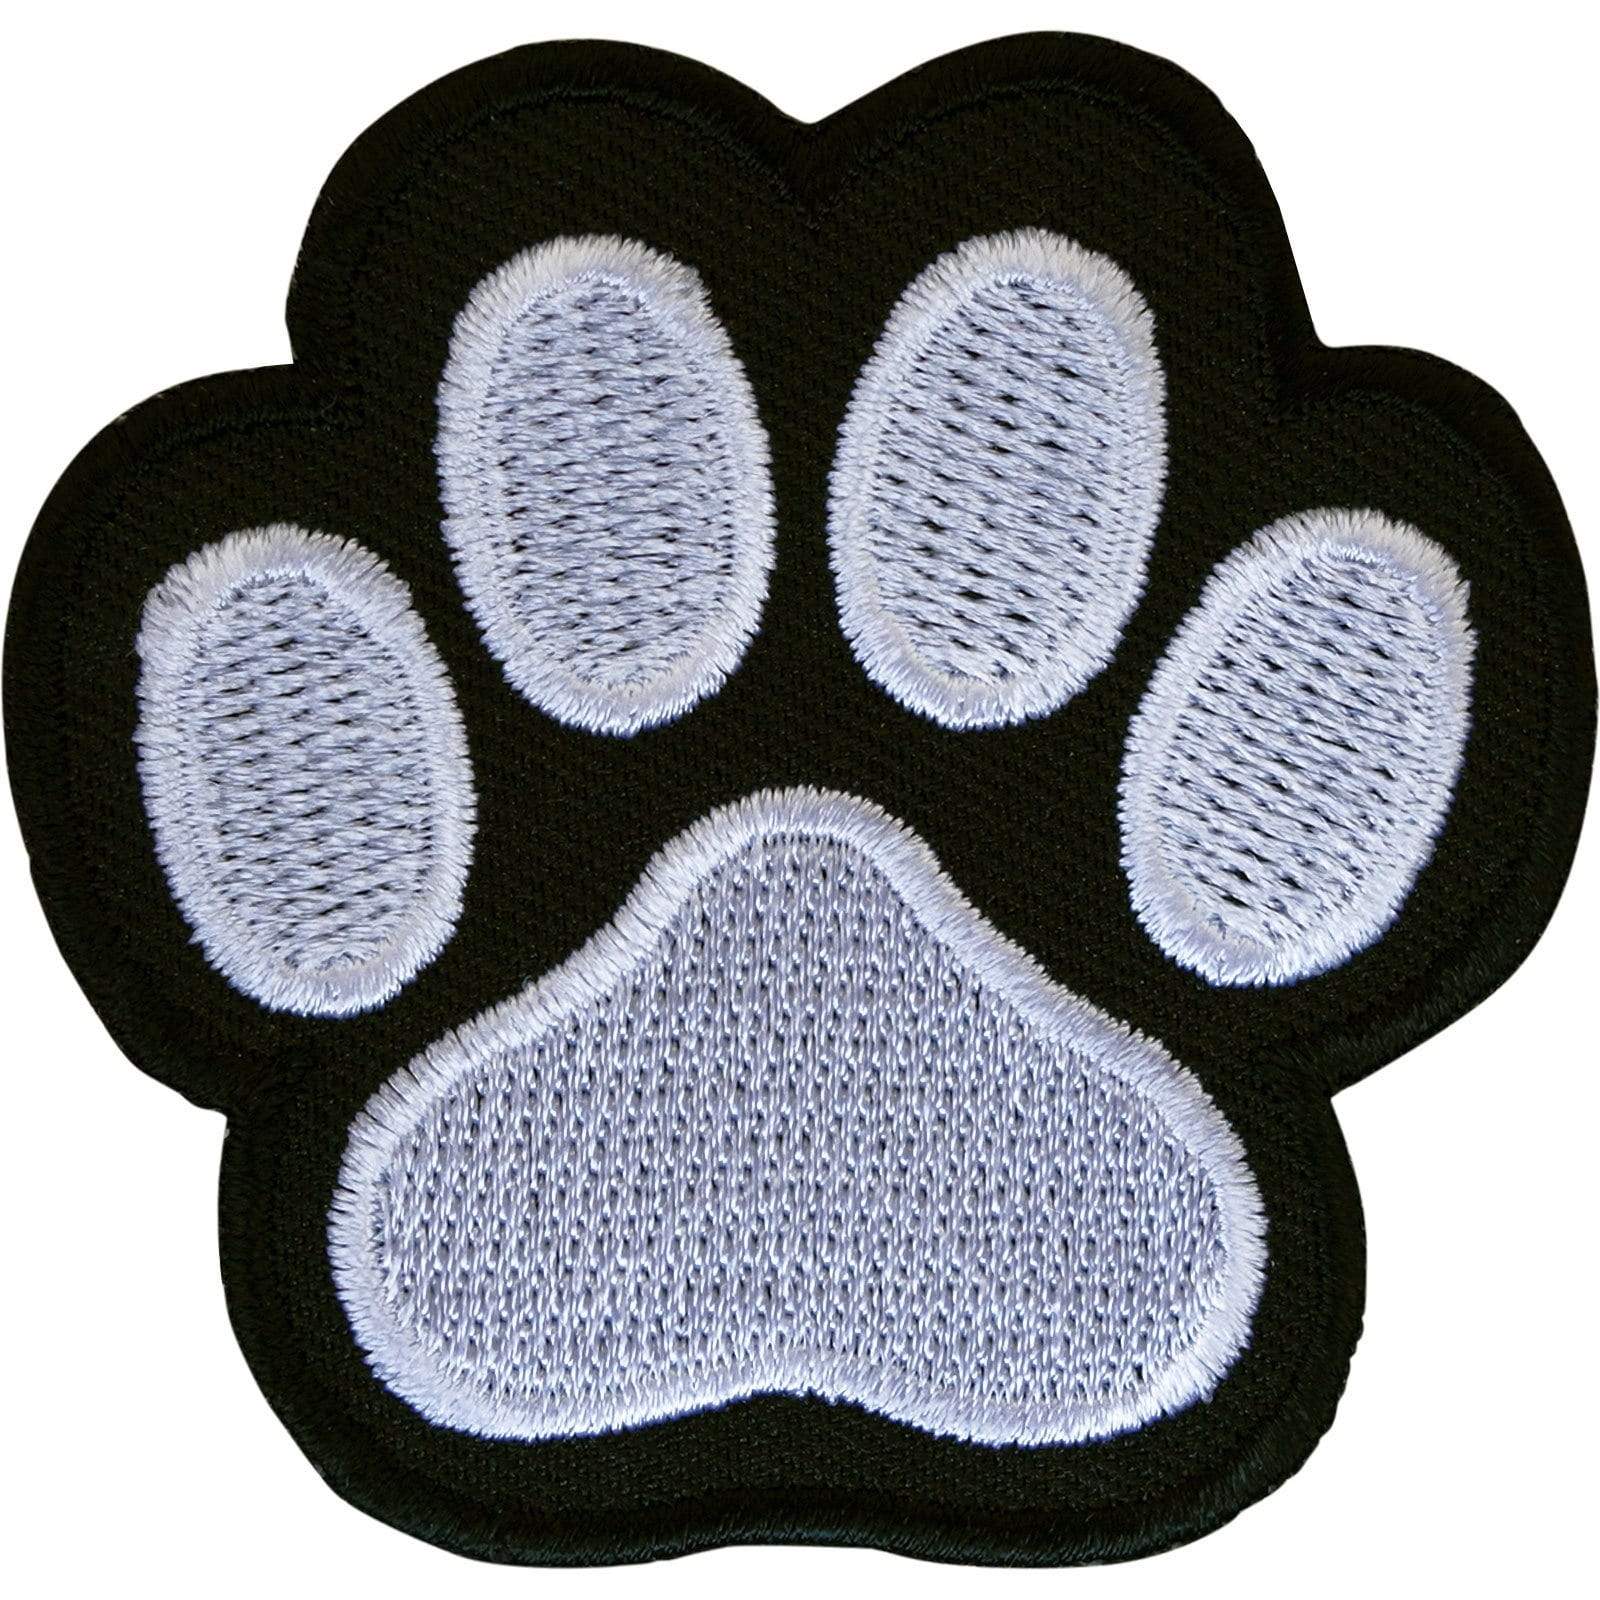 Paw Print Patch Iron Sew On Clothes Bag Embroidered Badge Embroidery Applique